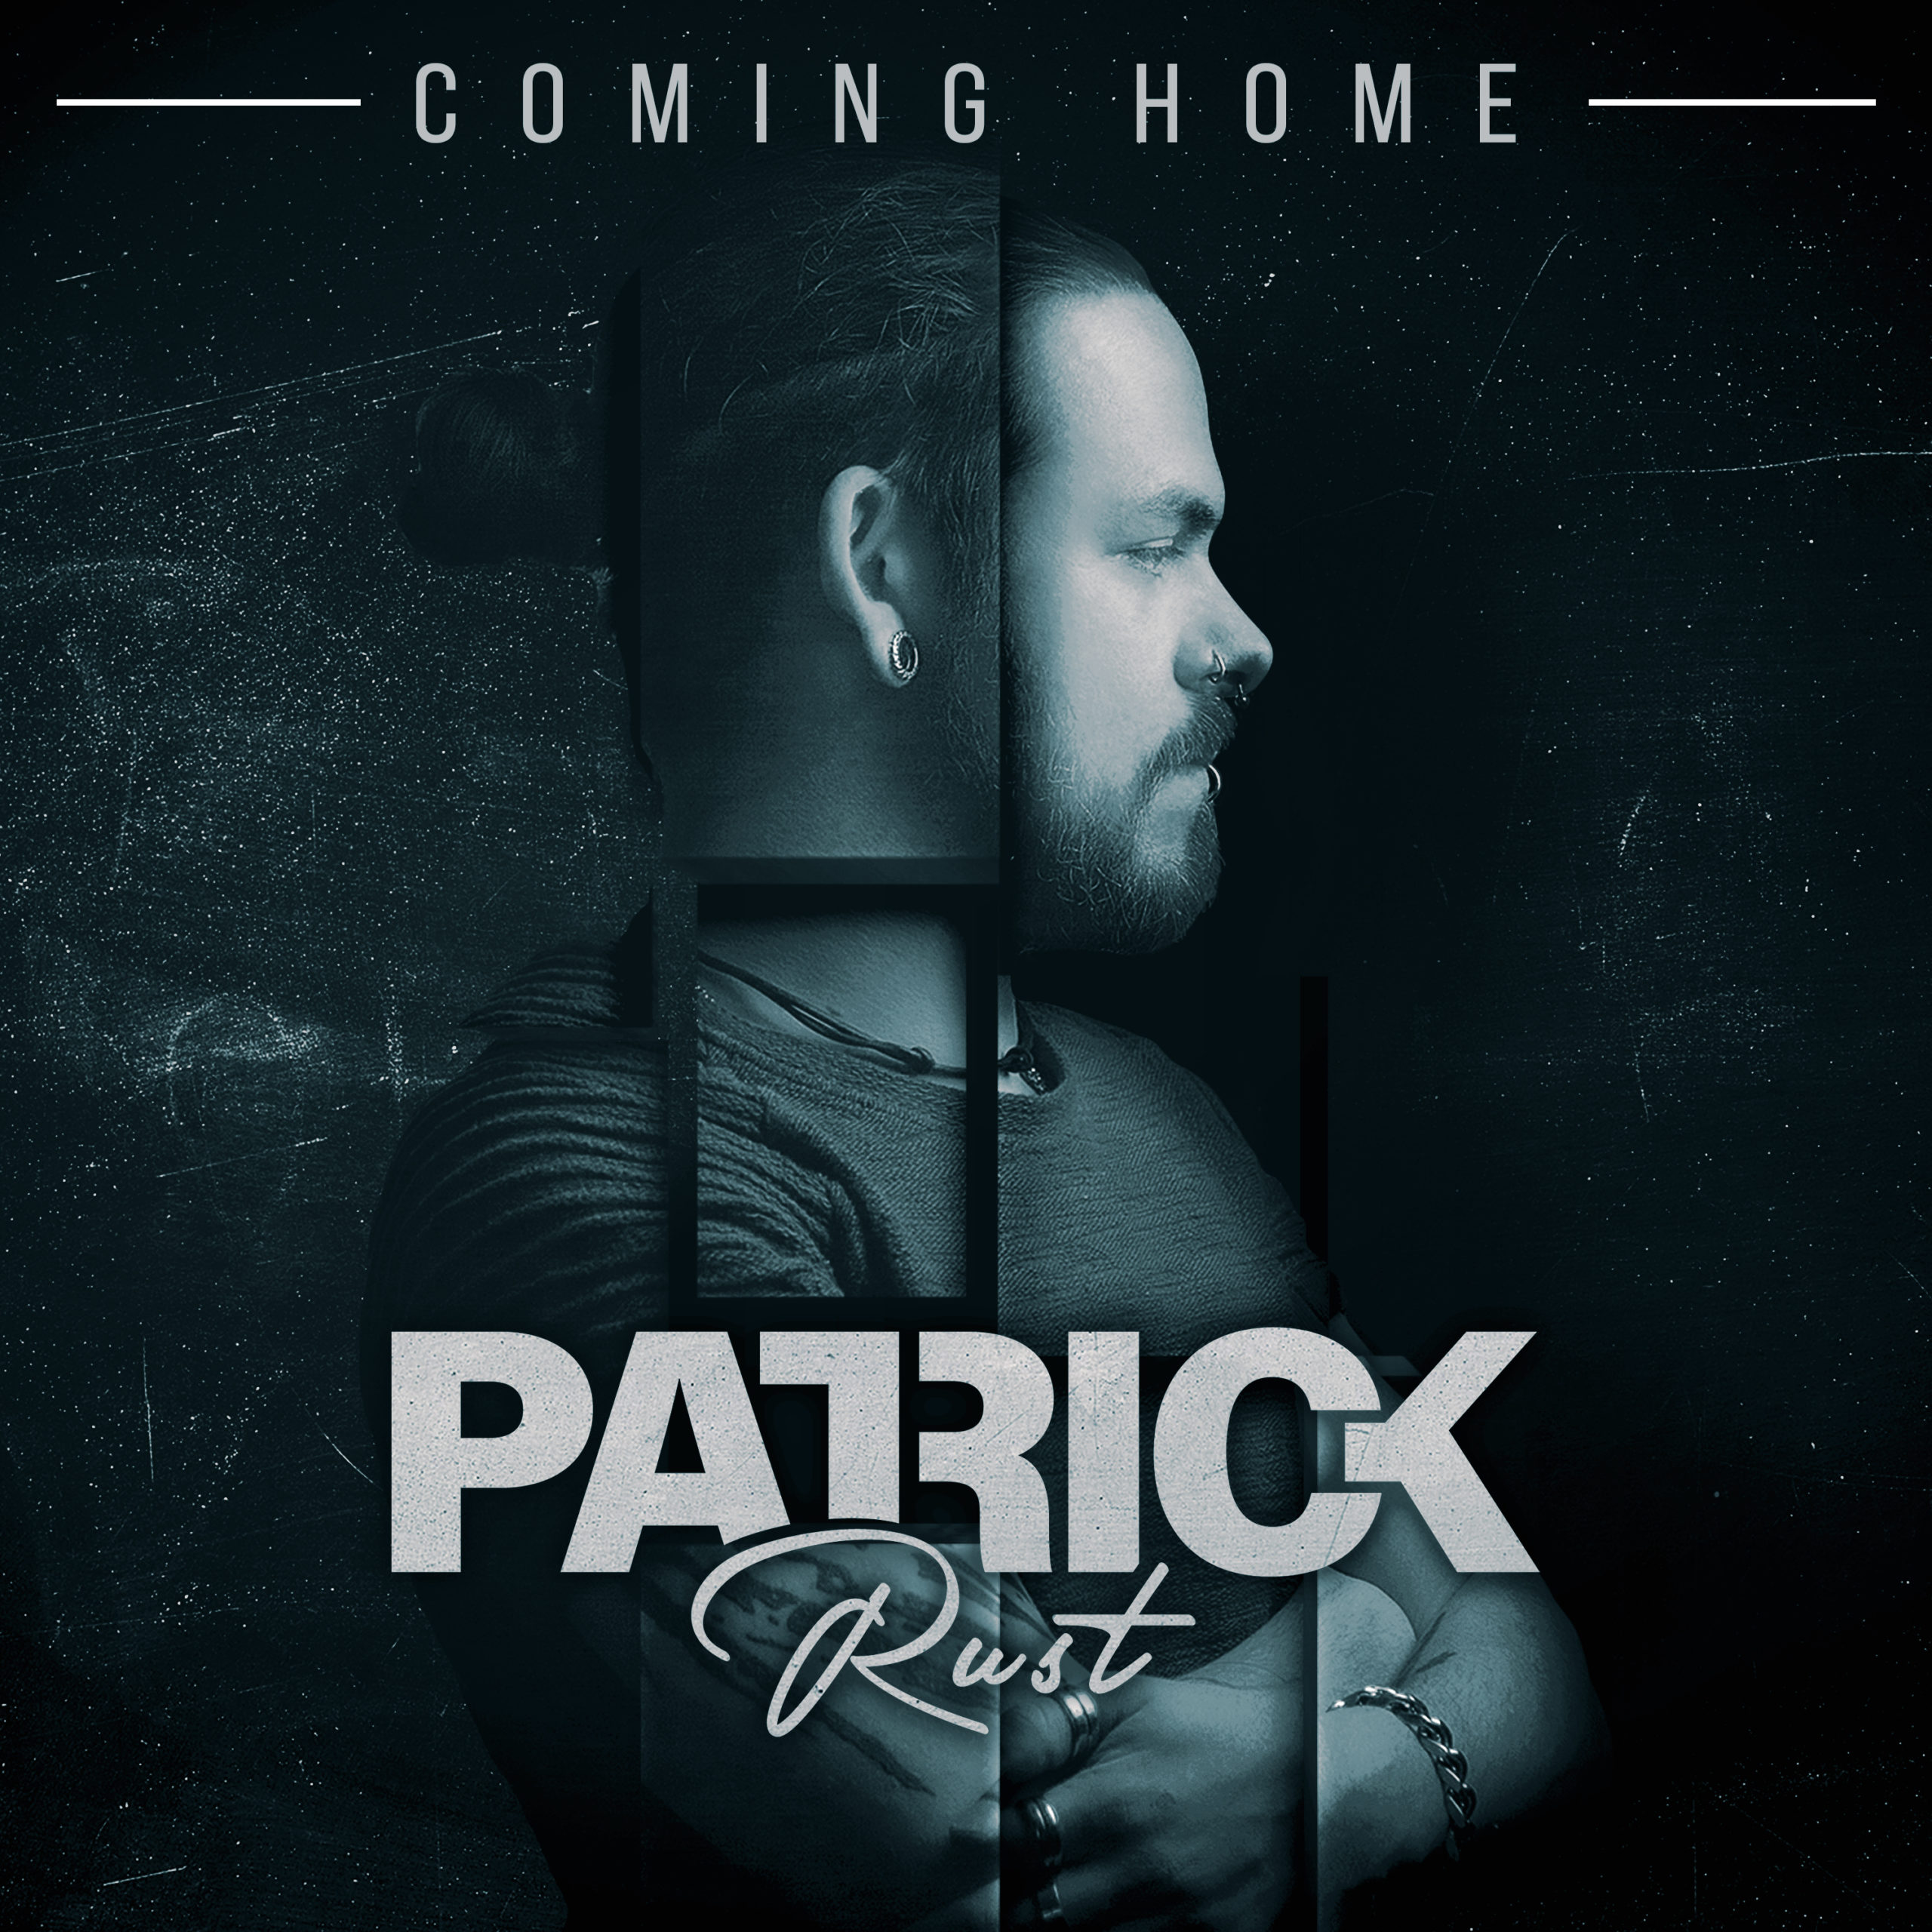 Patrick Rust - Coming Home